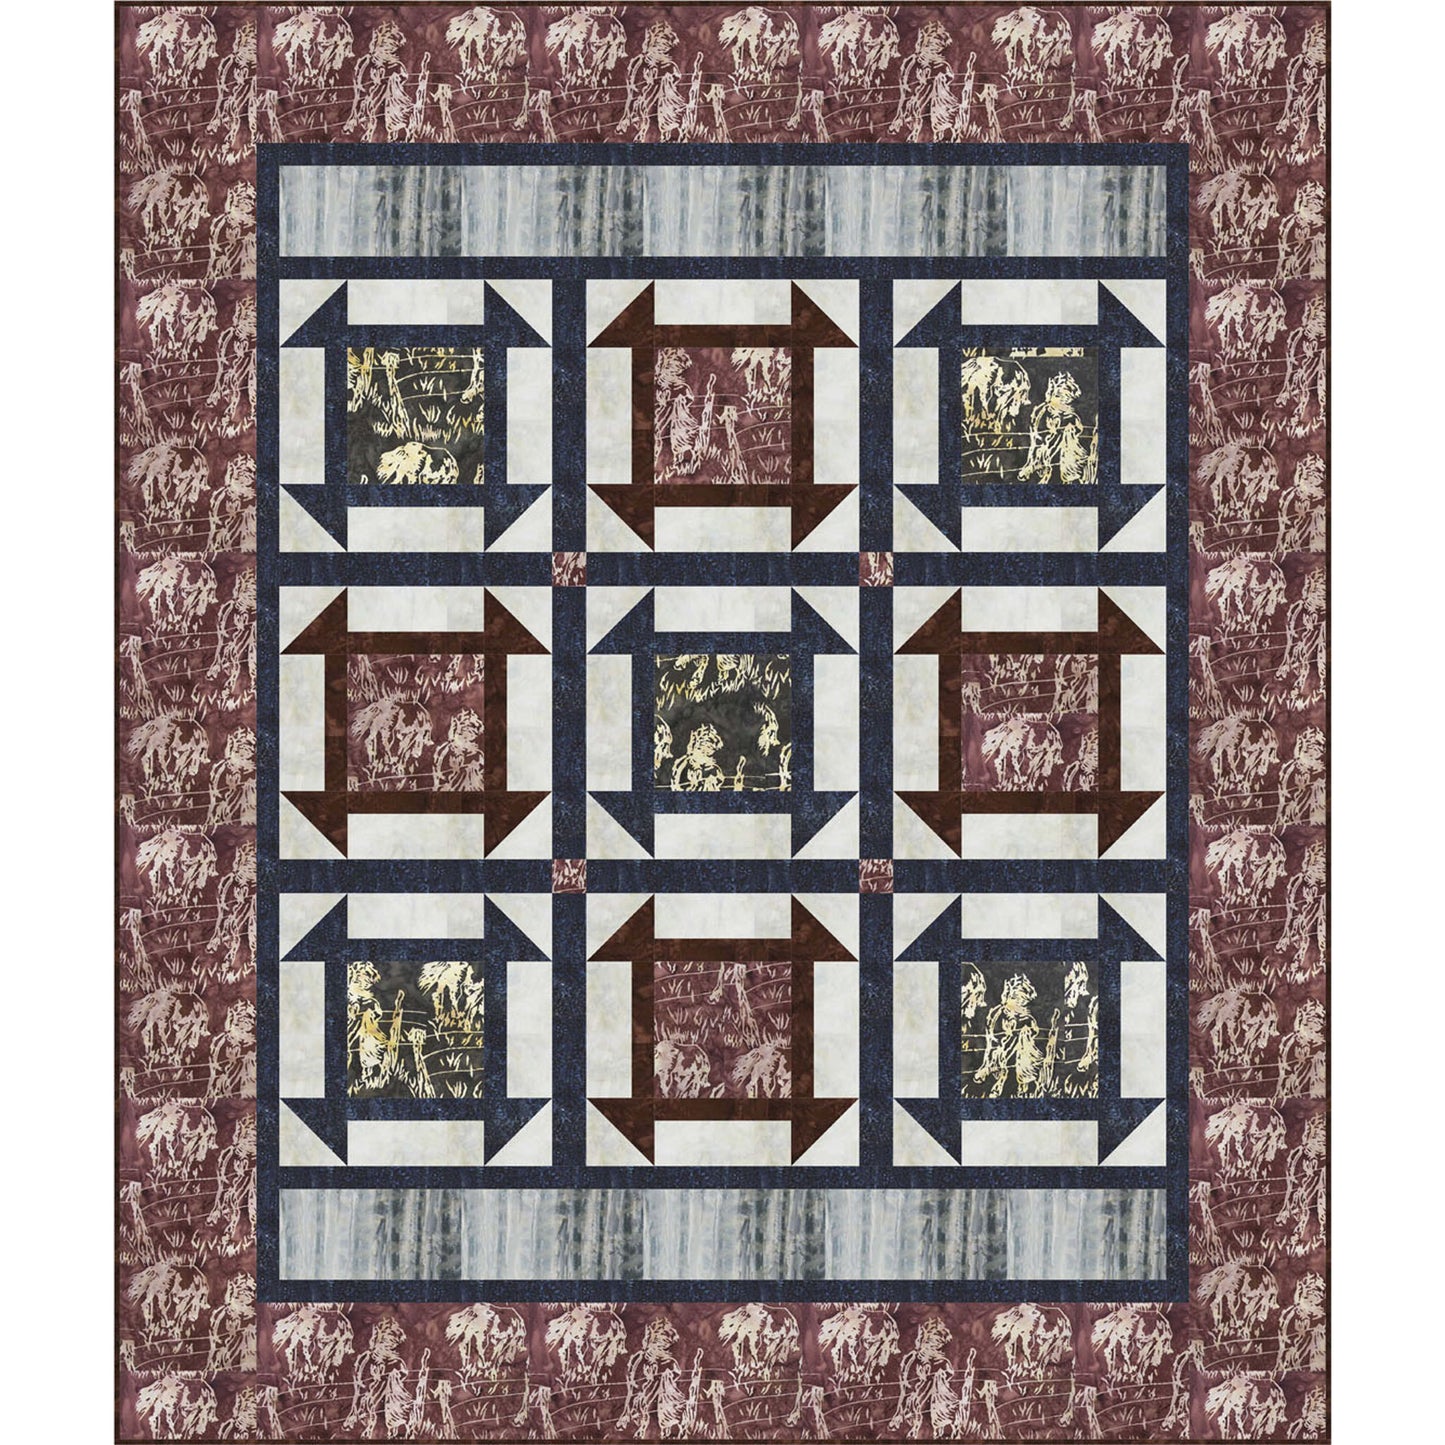 Patriotric red, blue, and white colored quilt with squre design with diamonds at the corners, sometimes called Greek squares.